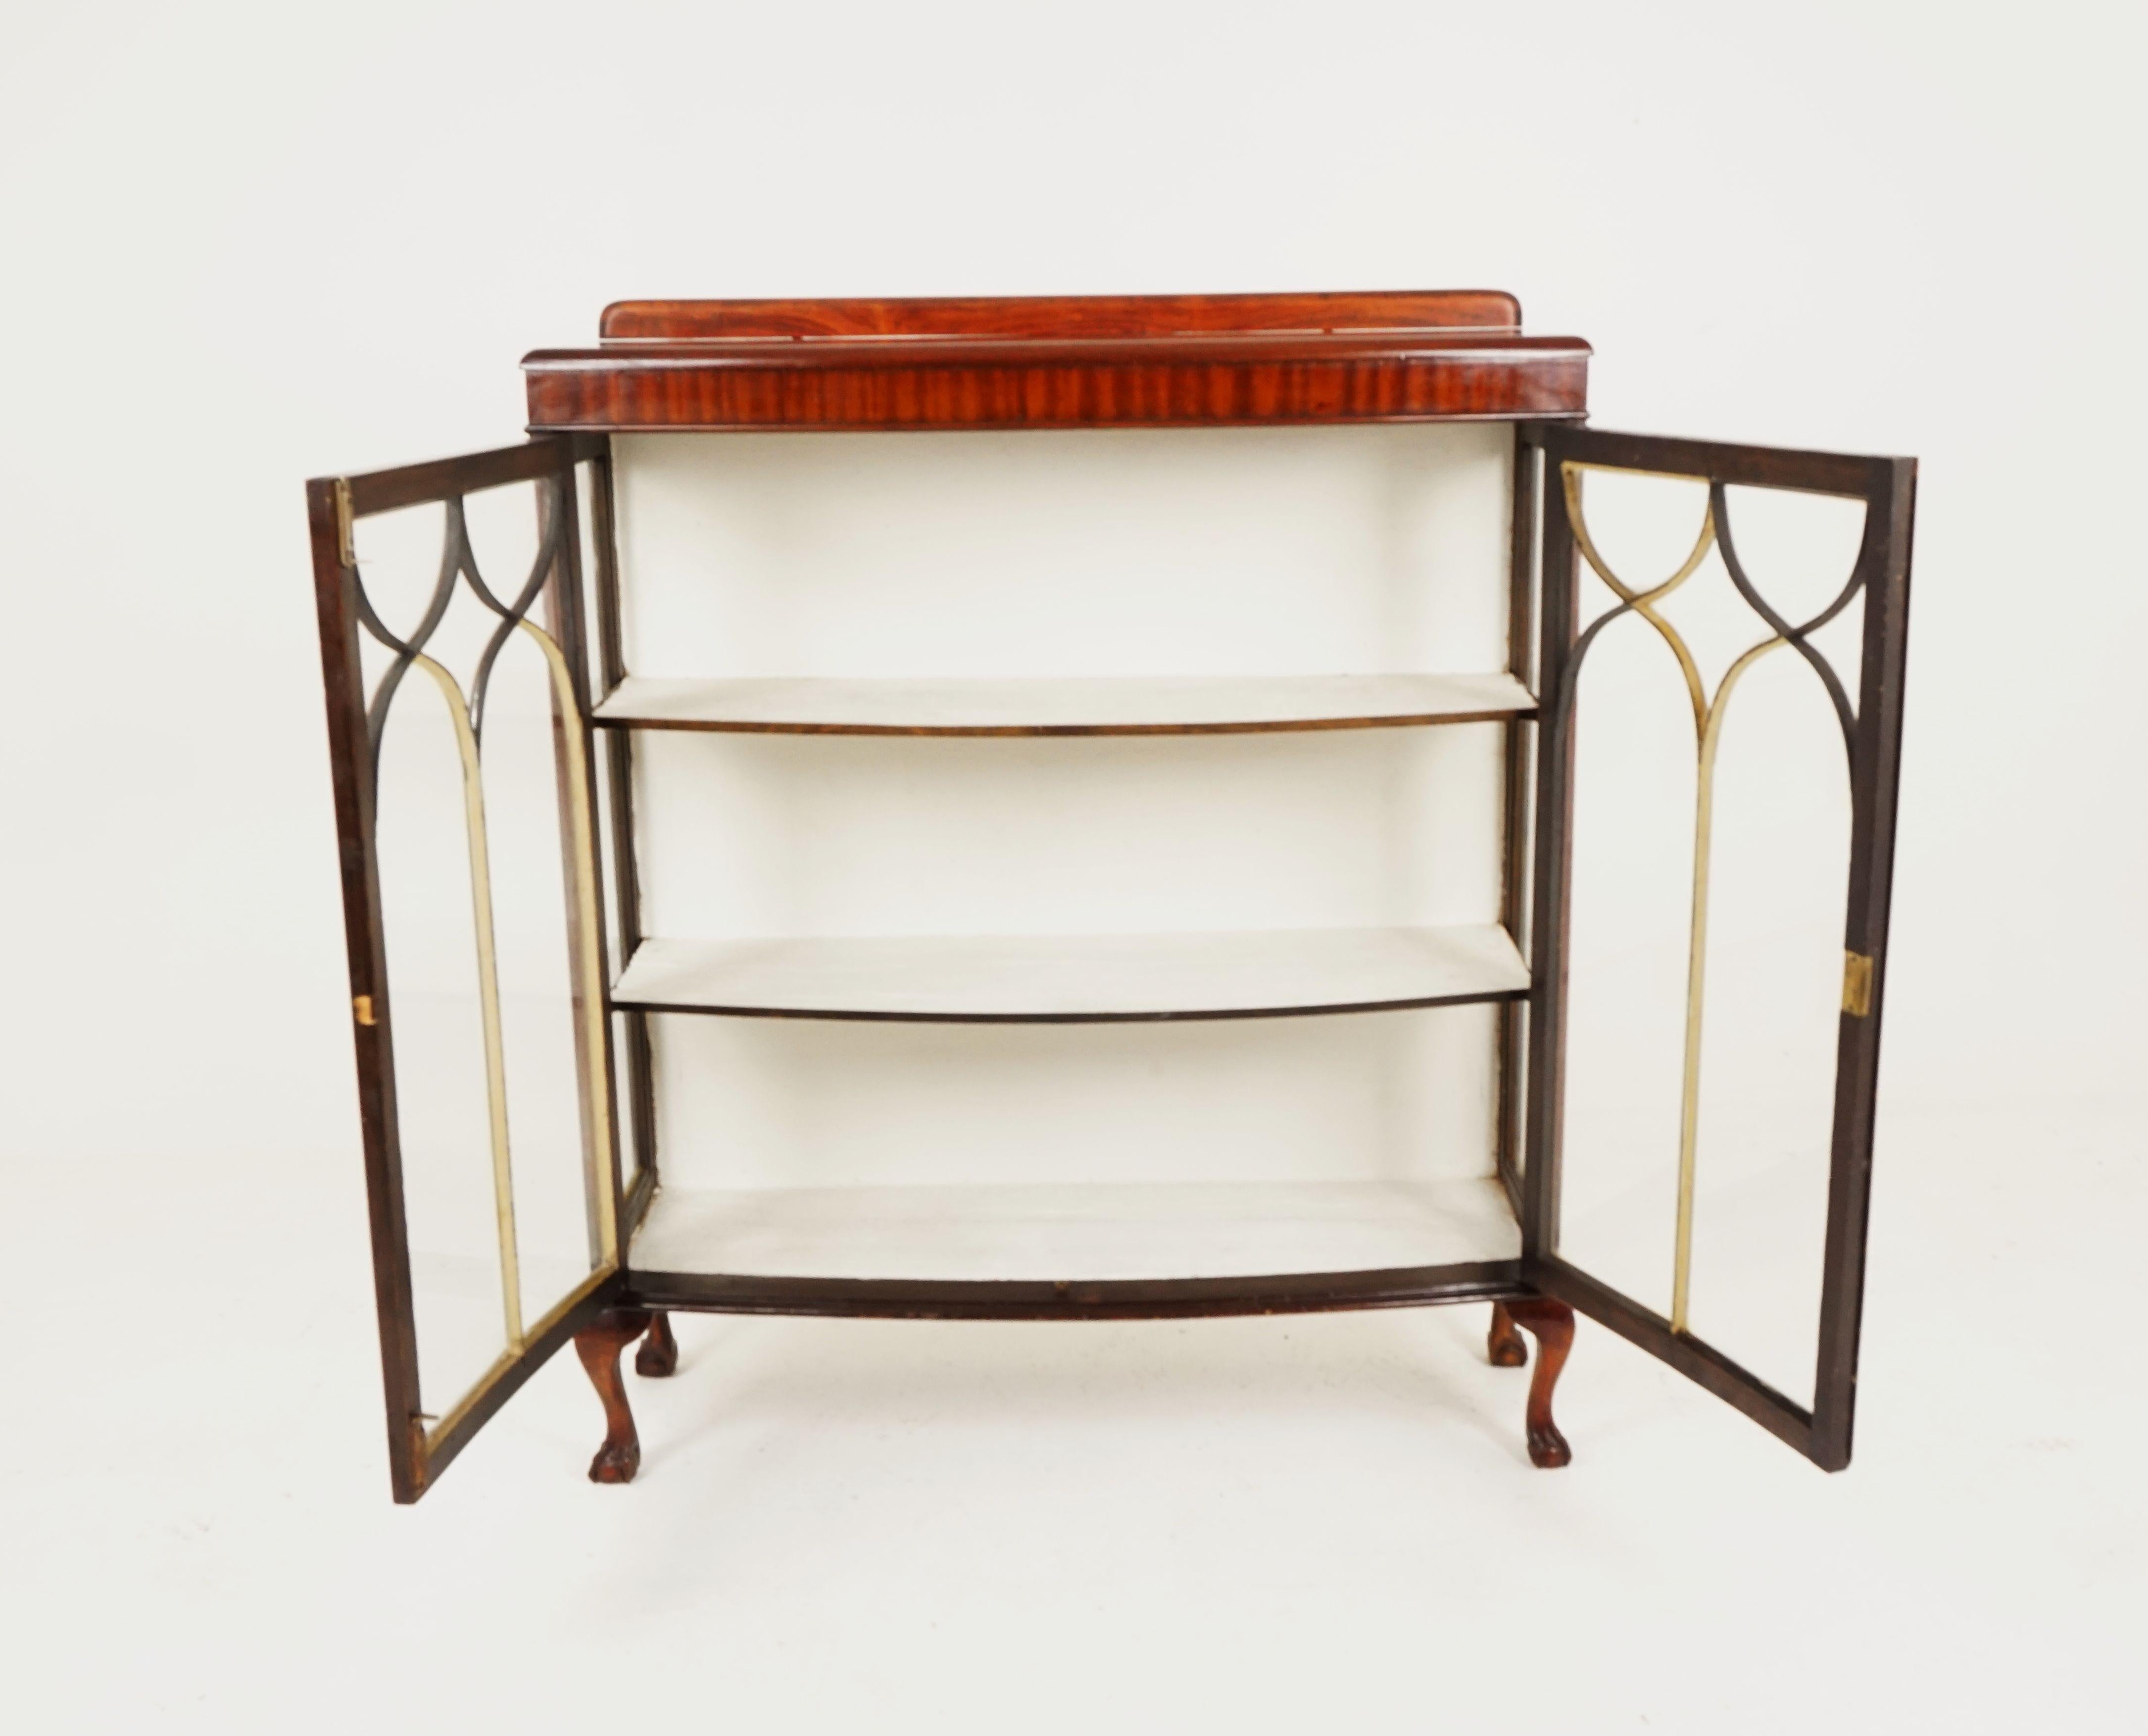 Hand-Crafted Vintage Mahogany Bow Front China Cabinet, Display Cabinet, Curio Cabinet, B1385